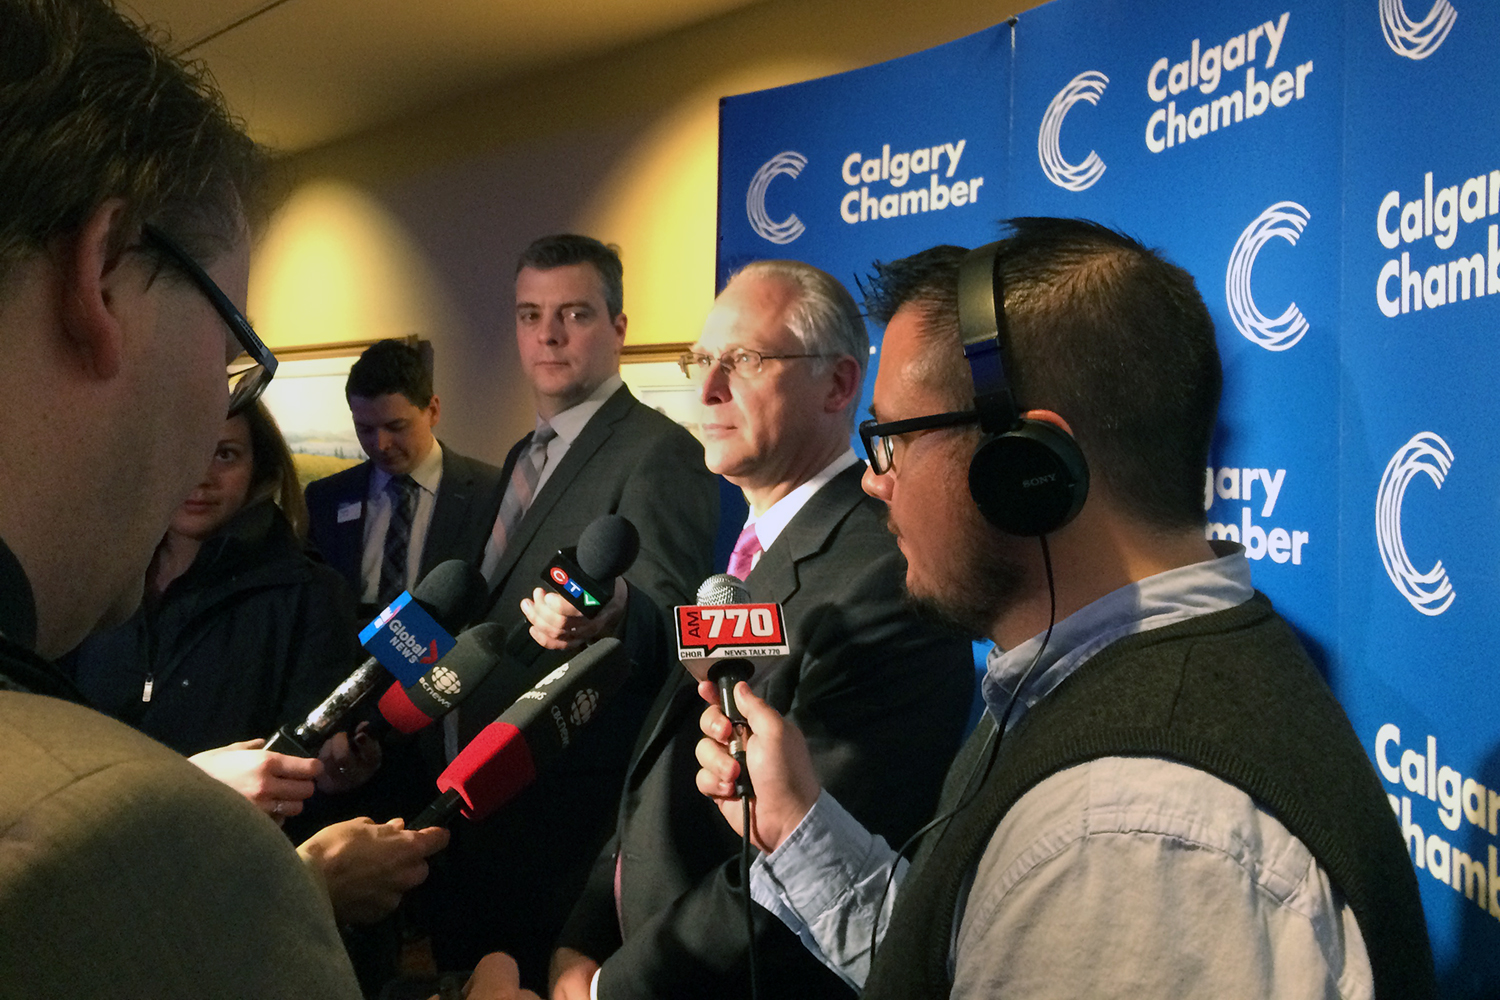 Chris Ragan, chair of Canada’s Ecofiscal Commission, answered questions for the media following the carbon tax luncheon. Photo by Nathan Michaels / For CREB®Now